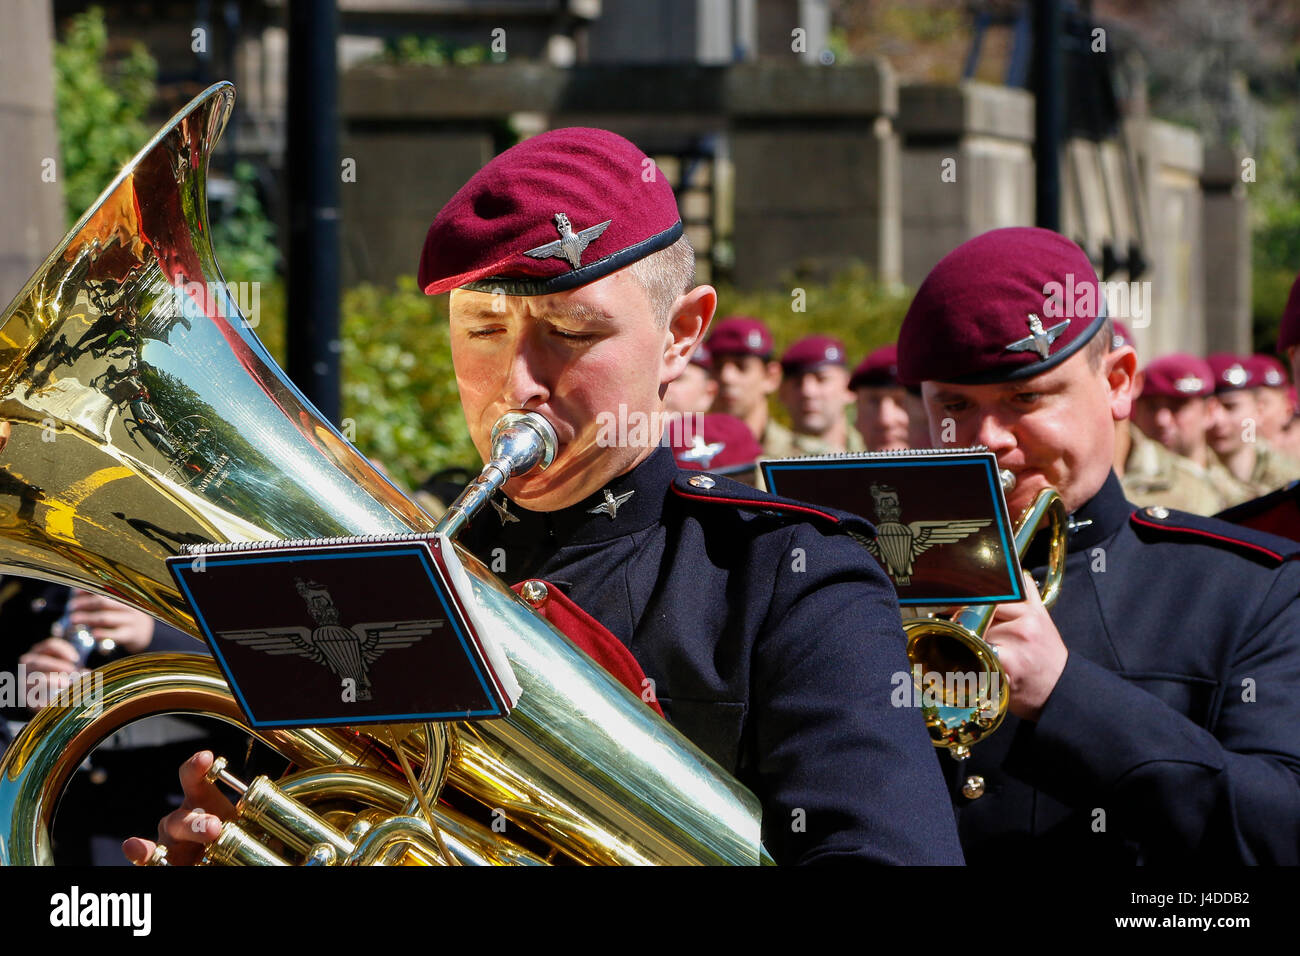 Soldier from the parachute regiment playing the tuba at a military parade, Glasgow, Scotland, UK Stock Photo